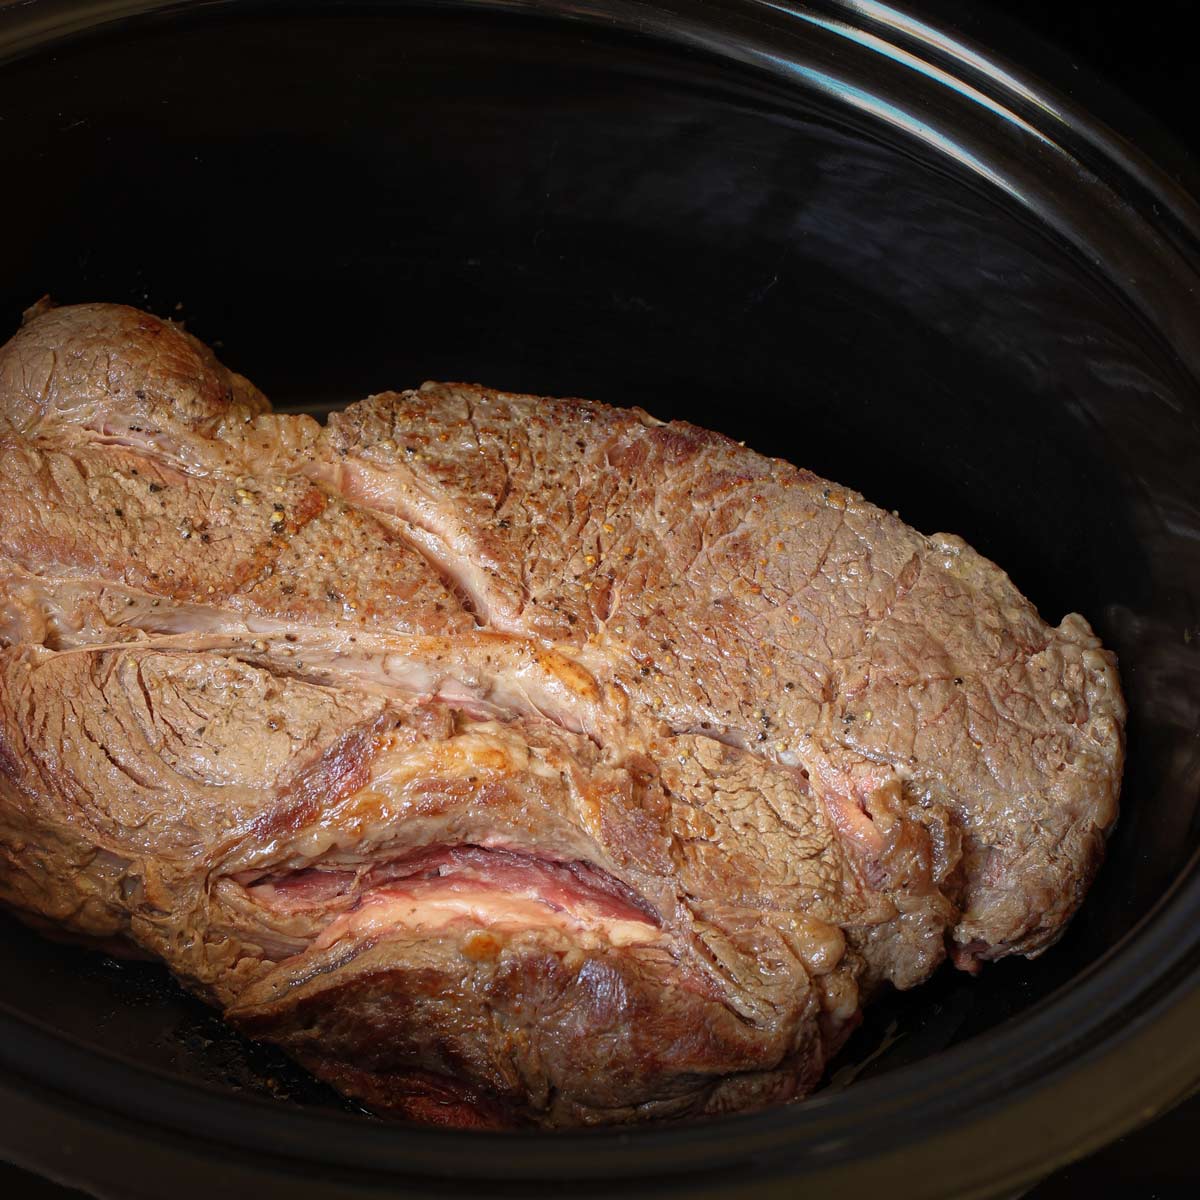 seared chuck roast in the crock of the slow cooker.